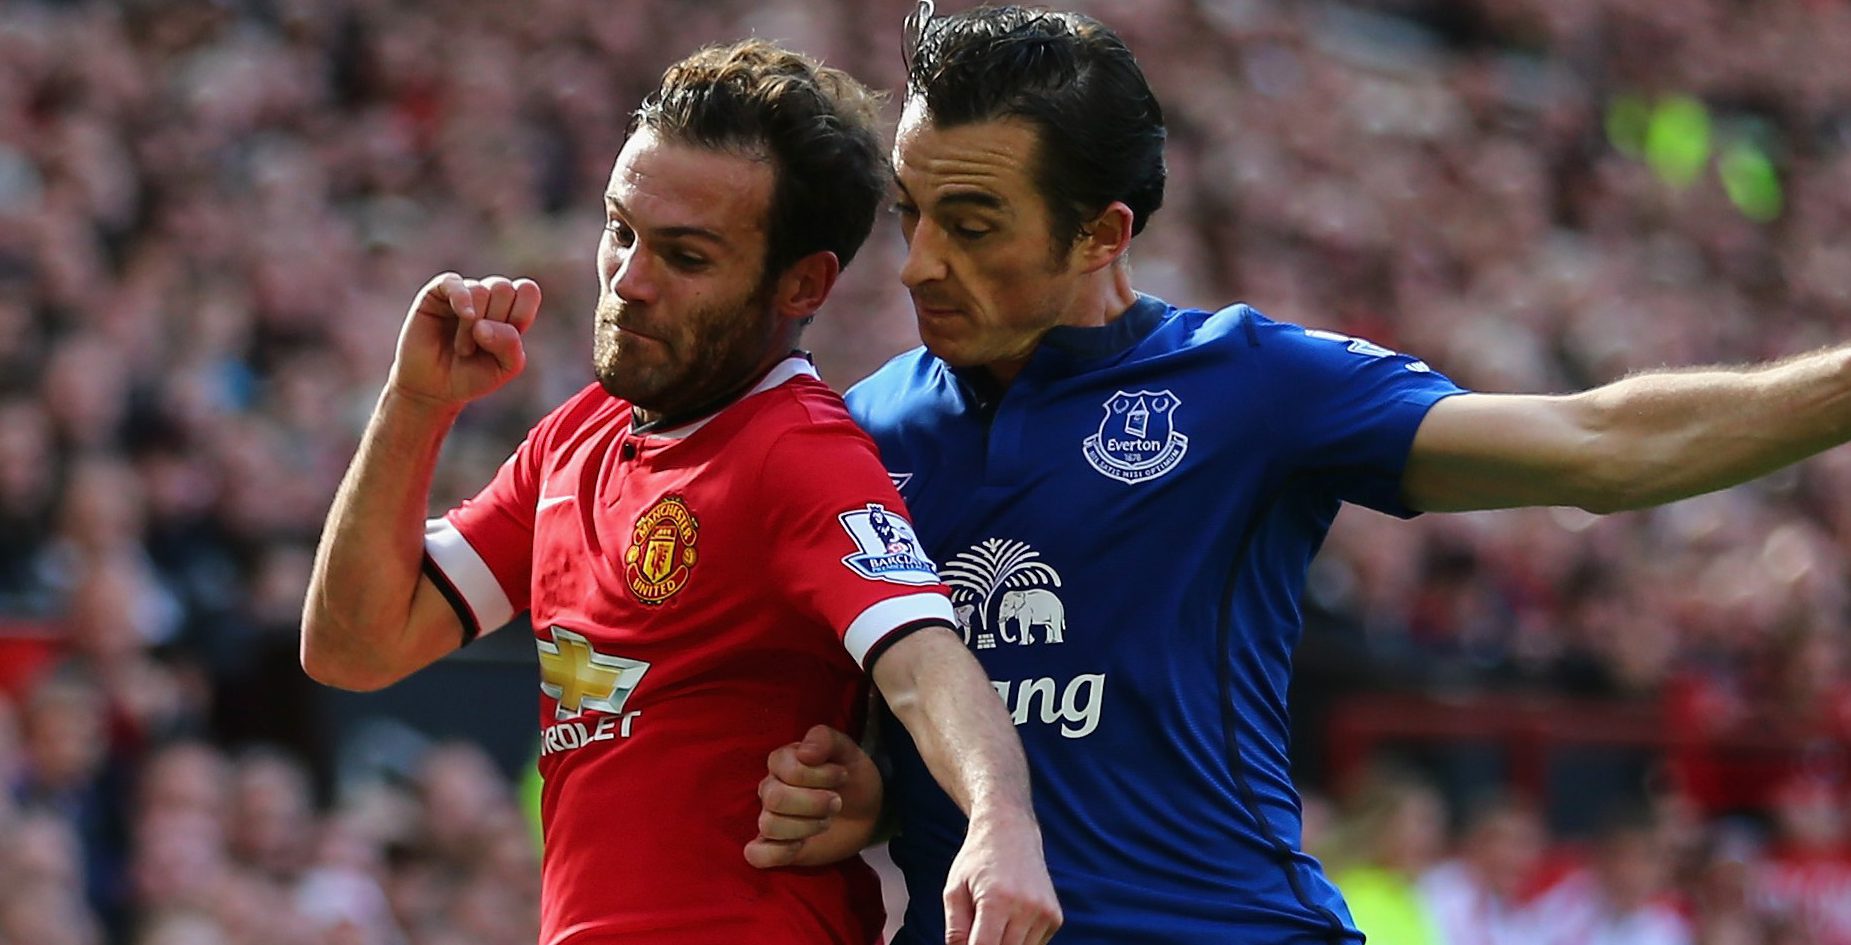 MANCHESTER, ENGLAND - OCTOBER 05: Leighton Baines of Everton competes with Juan Mata of Manchester United during the Barclays Premier League match between Manchester United and Everton at Old Trafford on October 5, 2014 in Manchester, England. (Photo by Clive Brunskill/Getty Images)